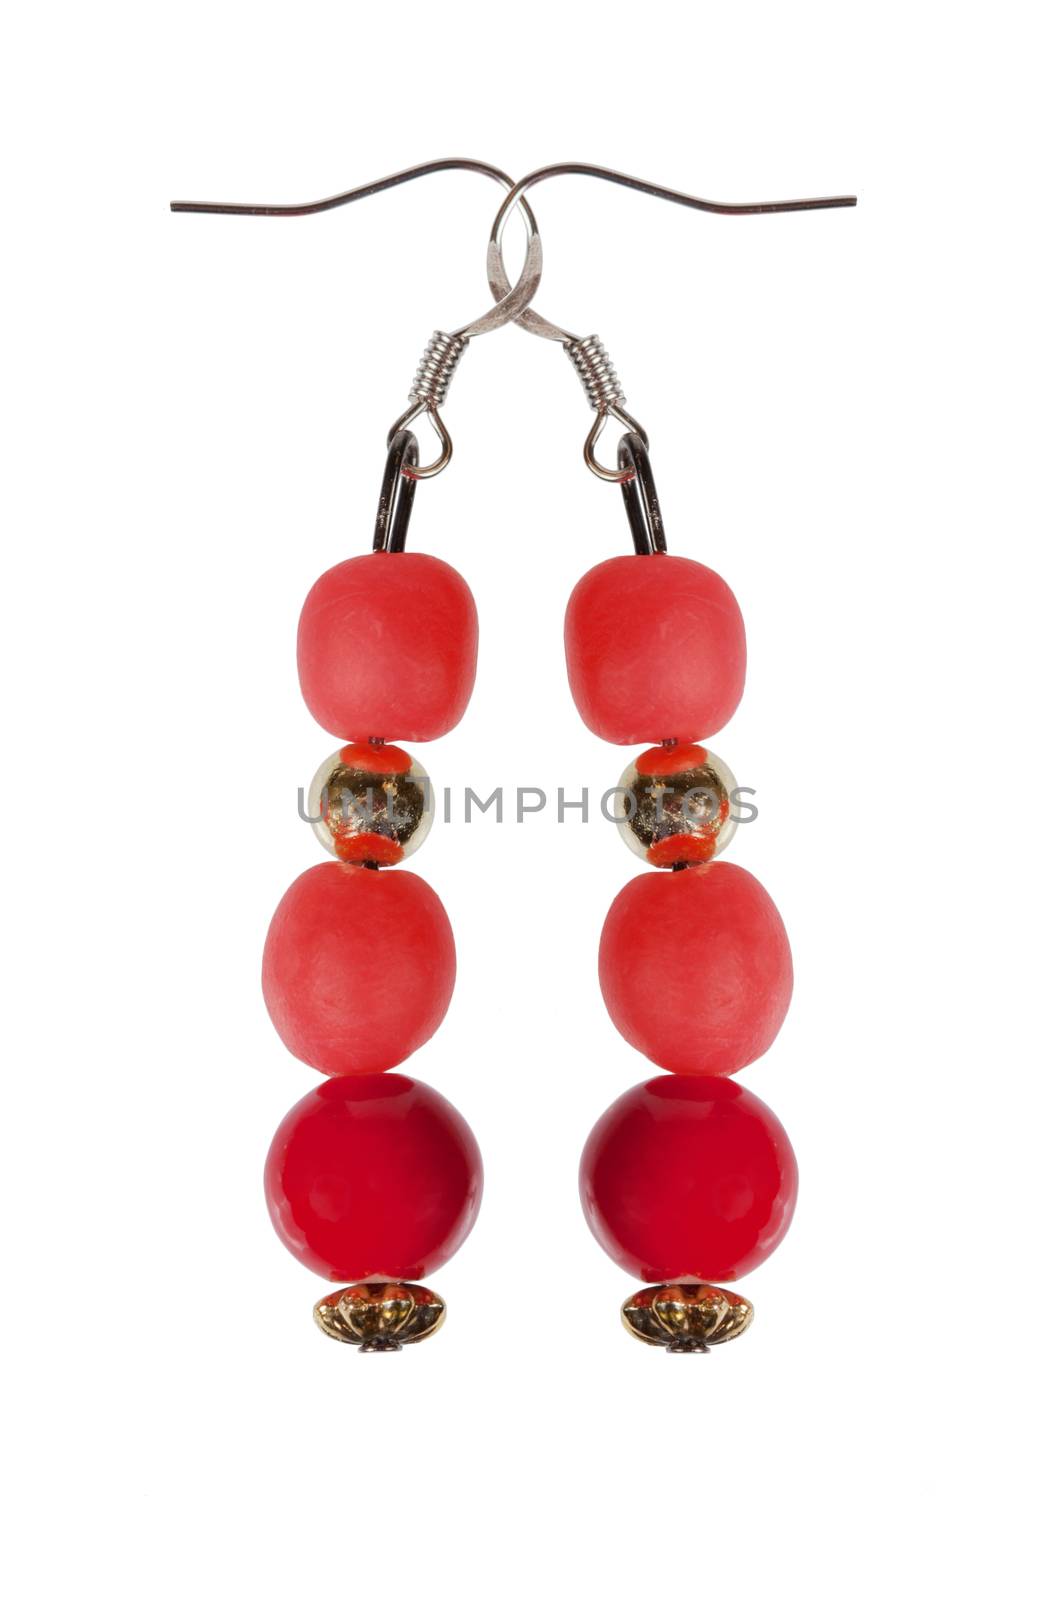 Earrings of red beads with gold elements isolated on a white background. Collage.